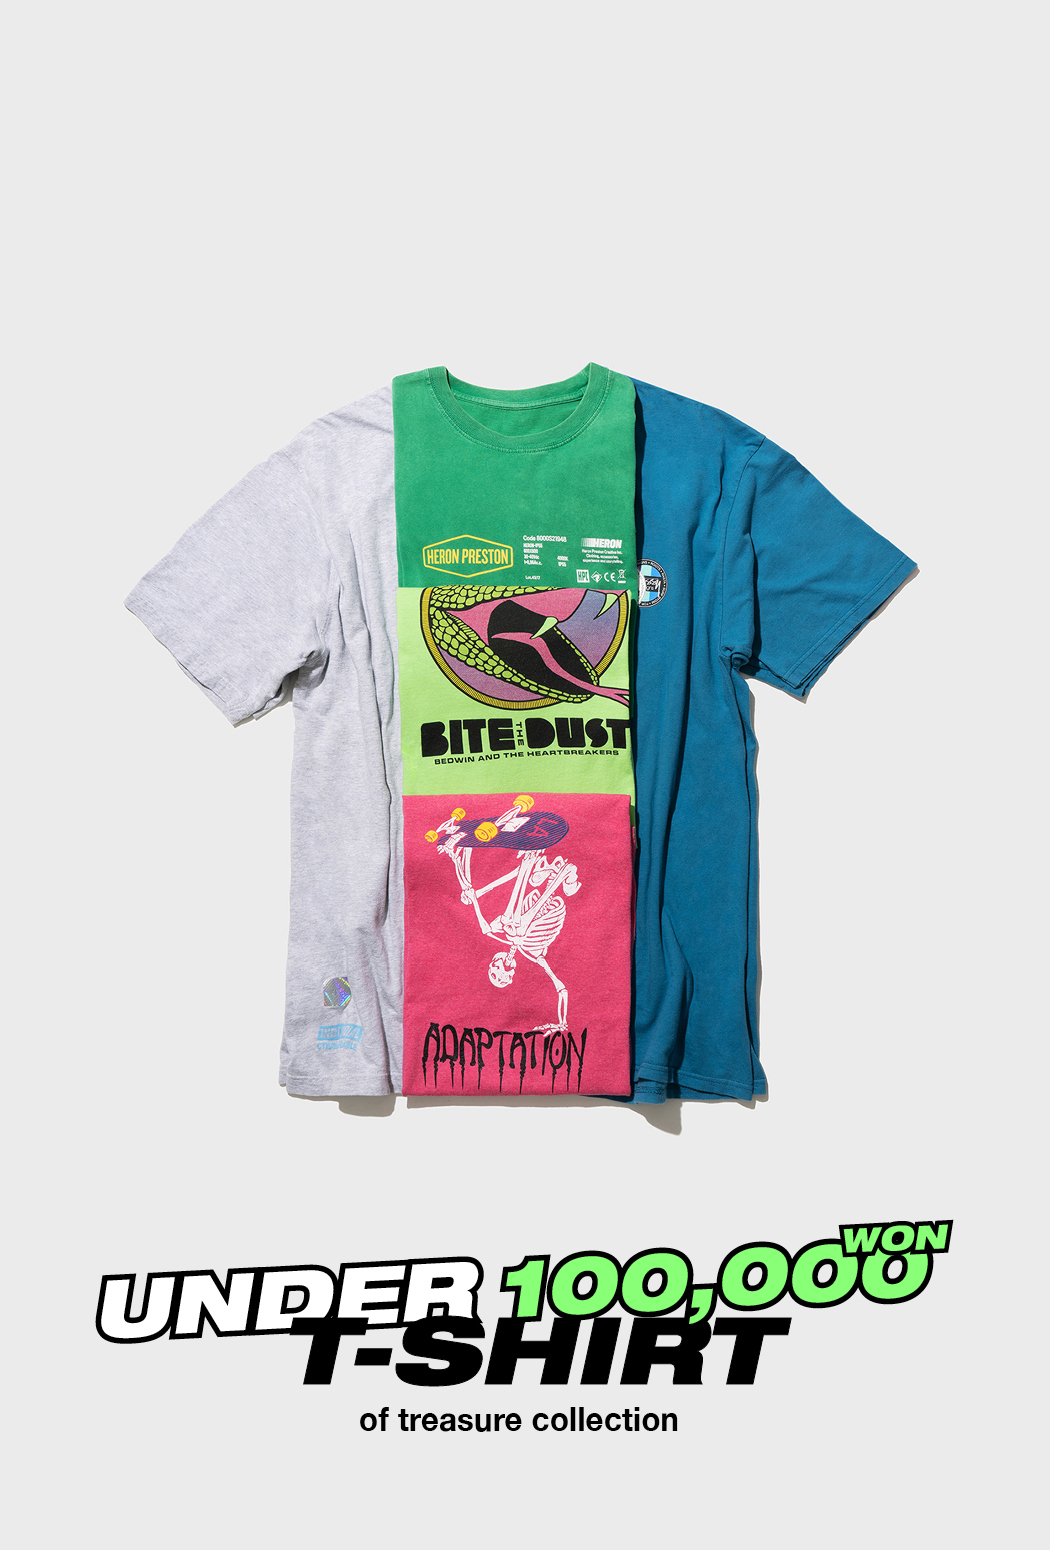 UNDER 100,000 won T-SHIRT of treasure collection